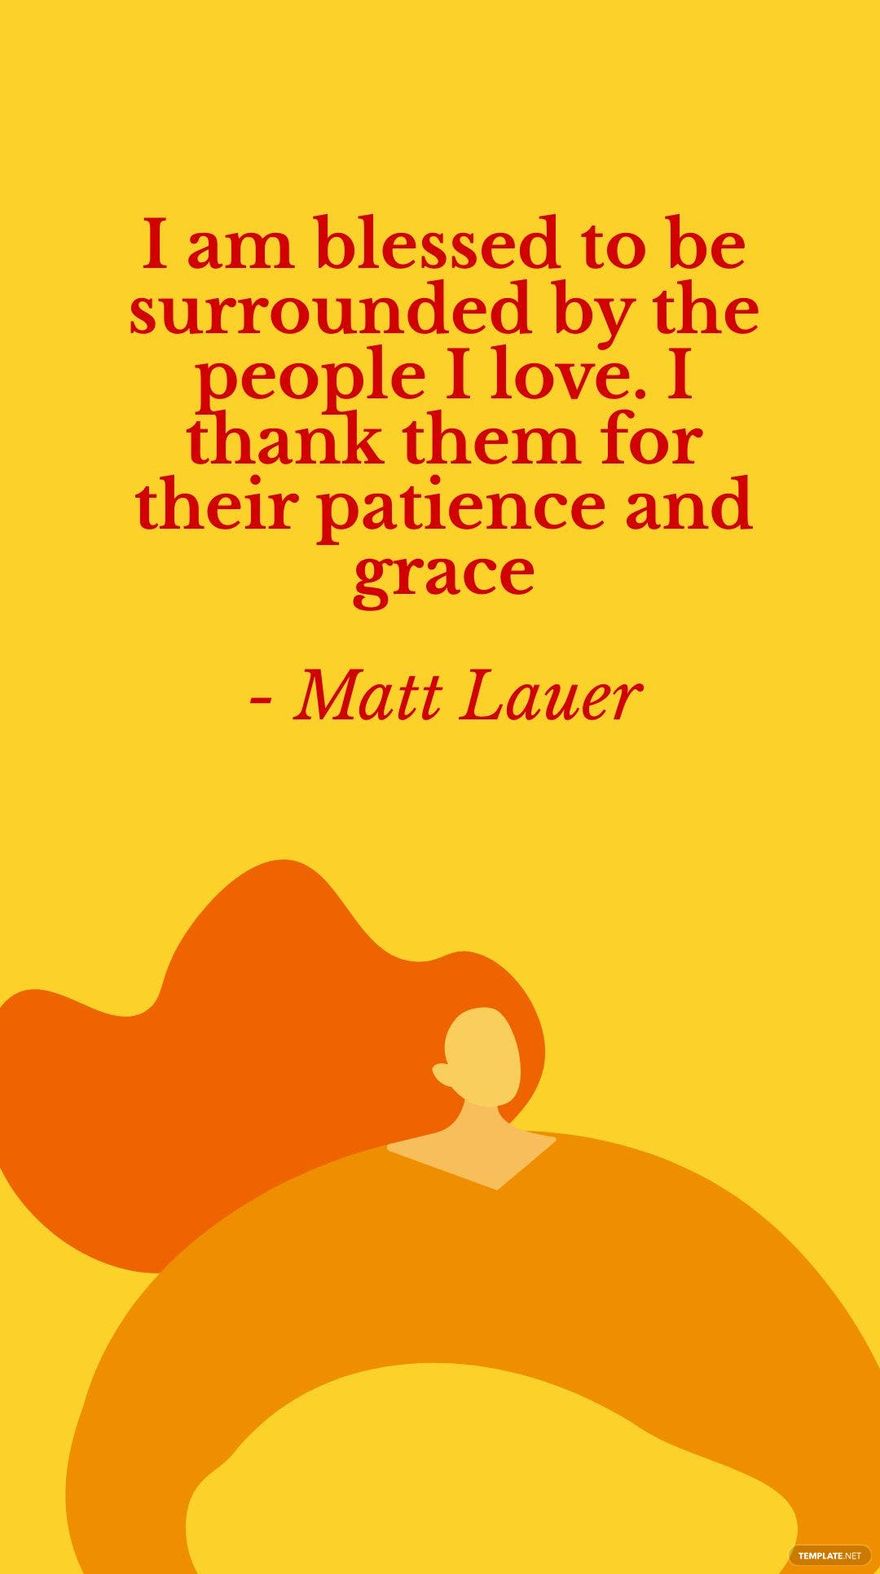 Matt Lauer - I am blessed to be surrounded by the people I love. I thank them for their patience and grace